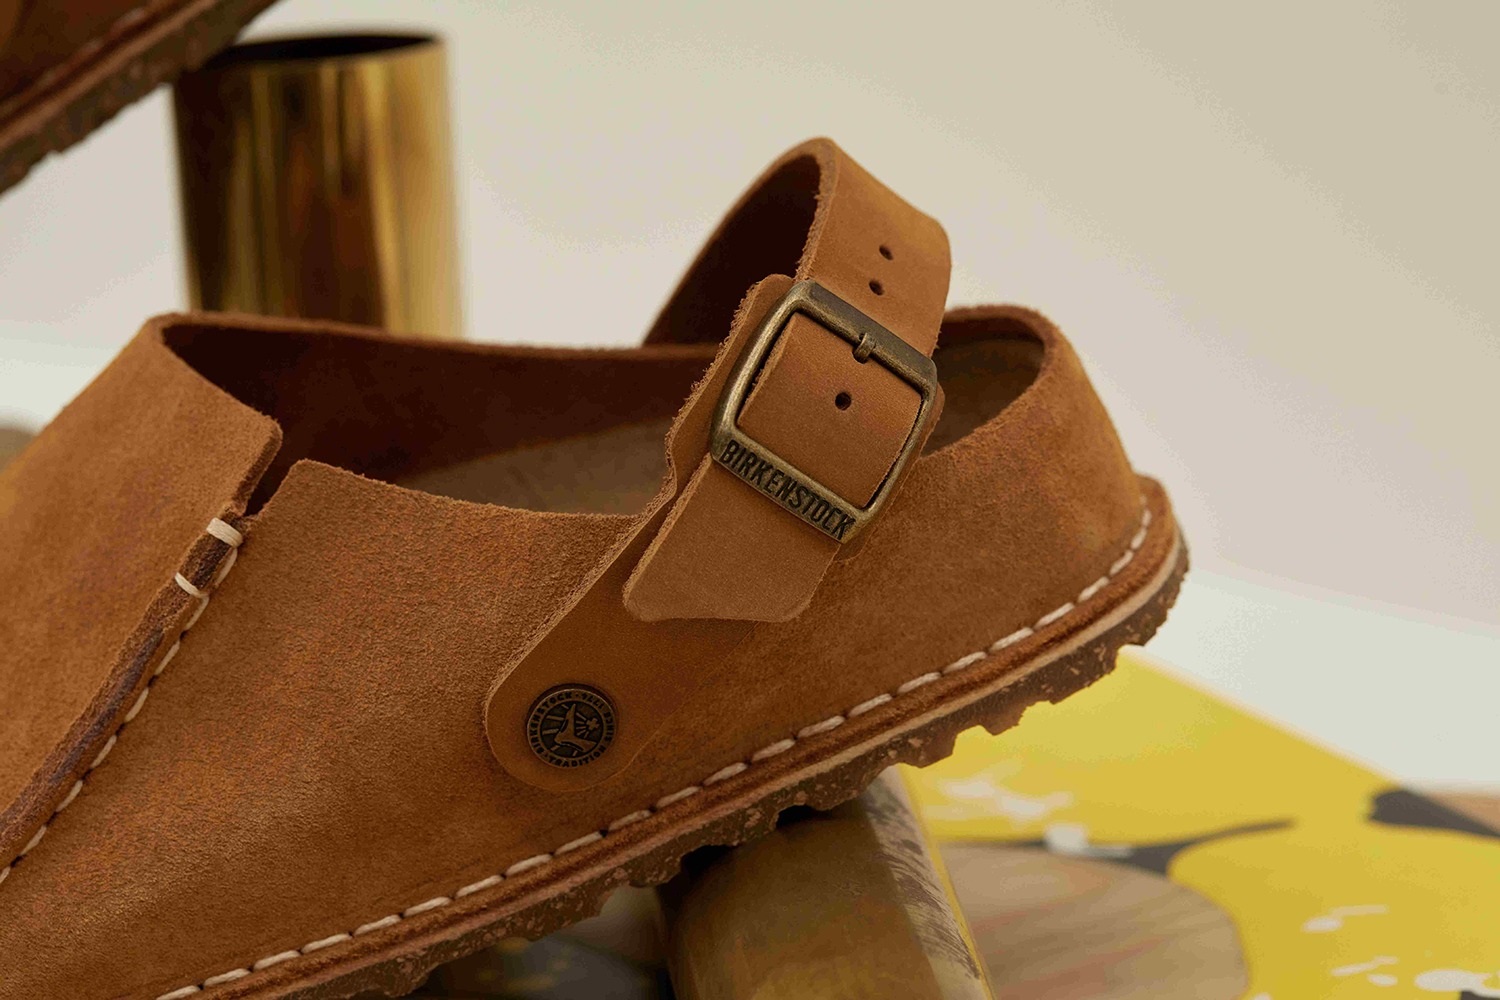 A photo of Birkenstock's new Lutry clog in brown or black suede